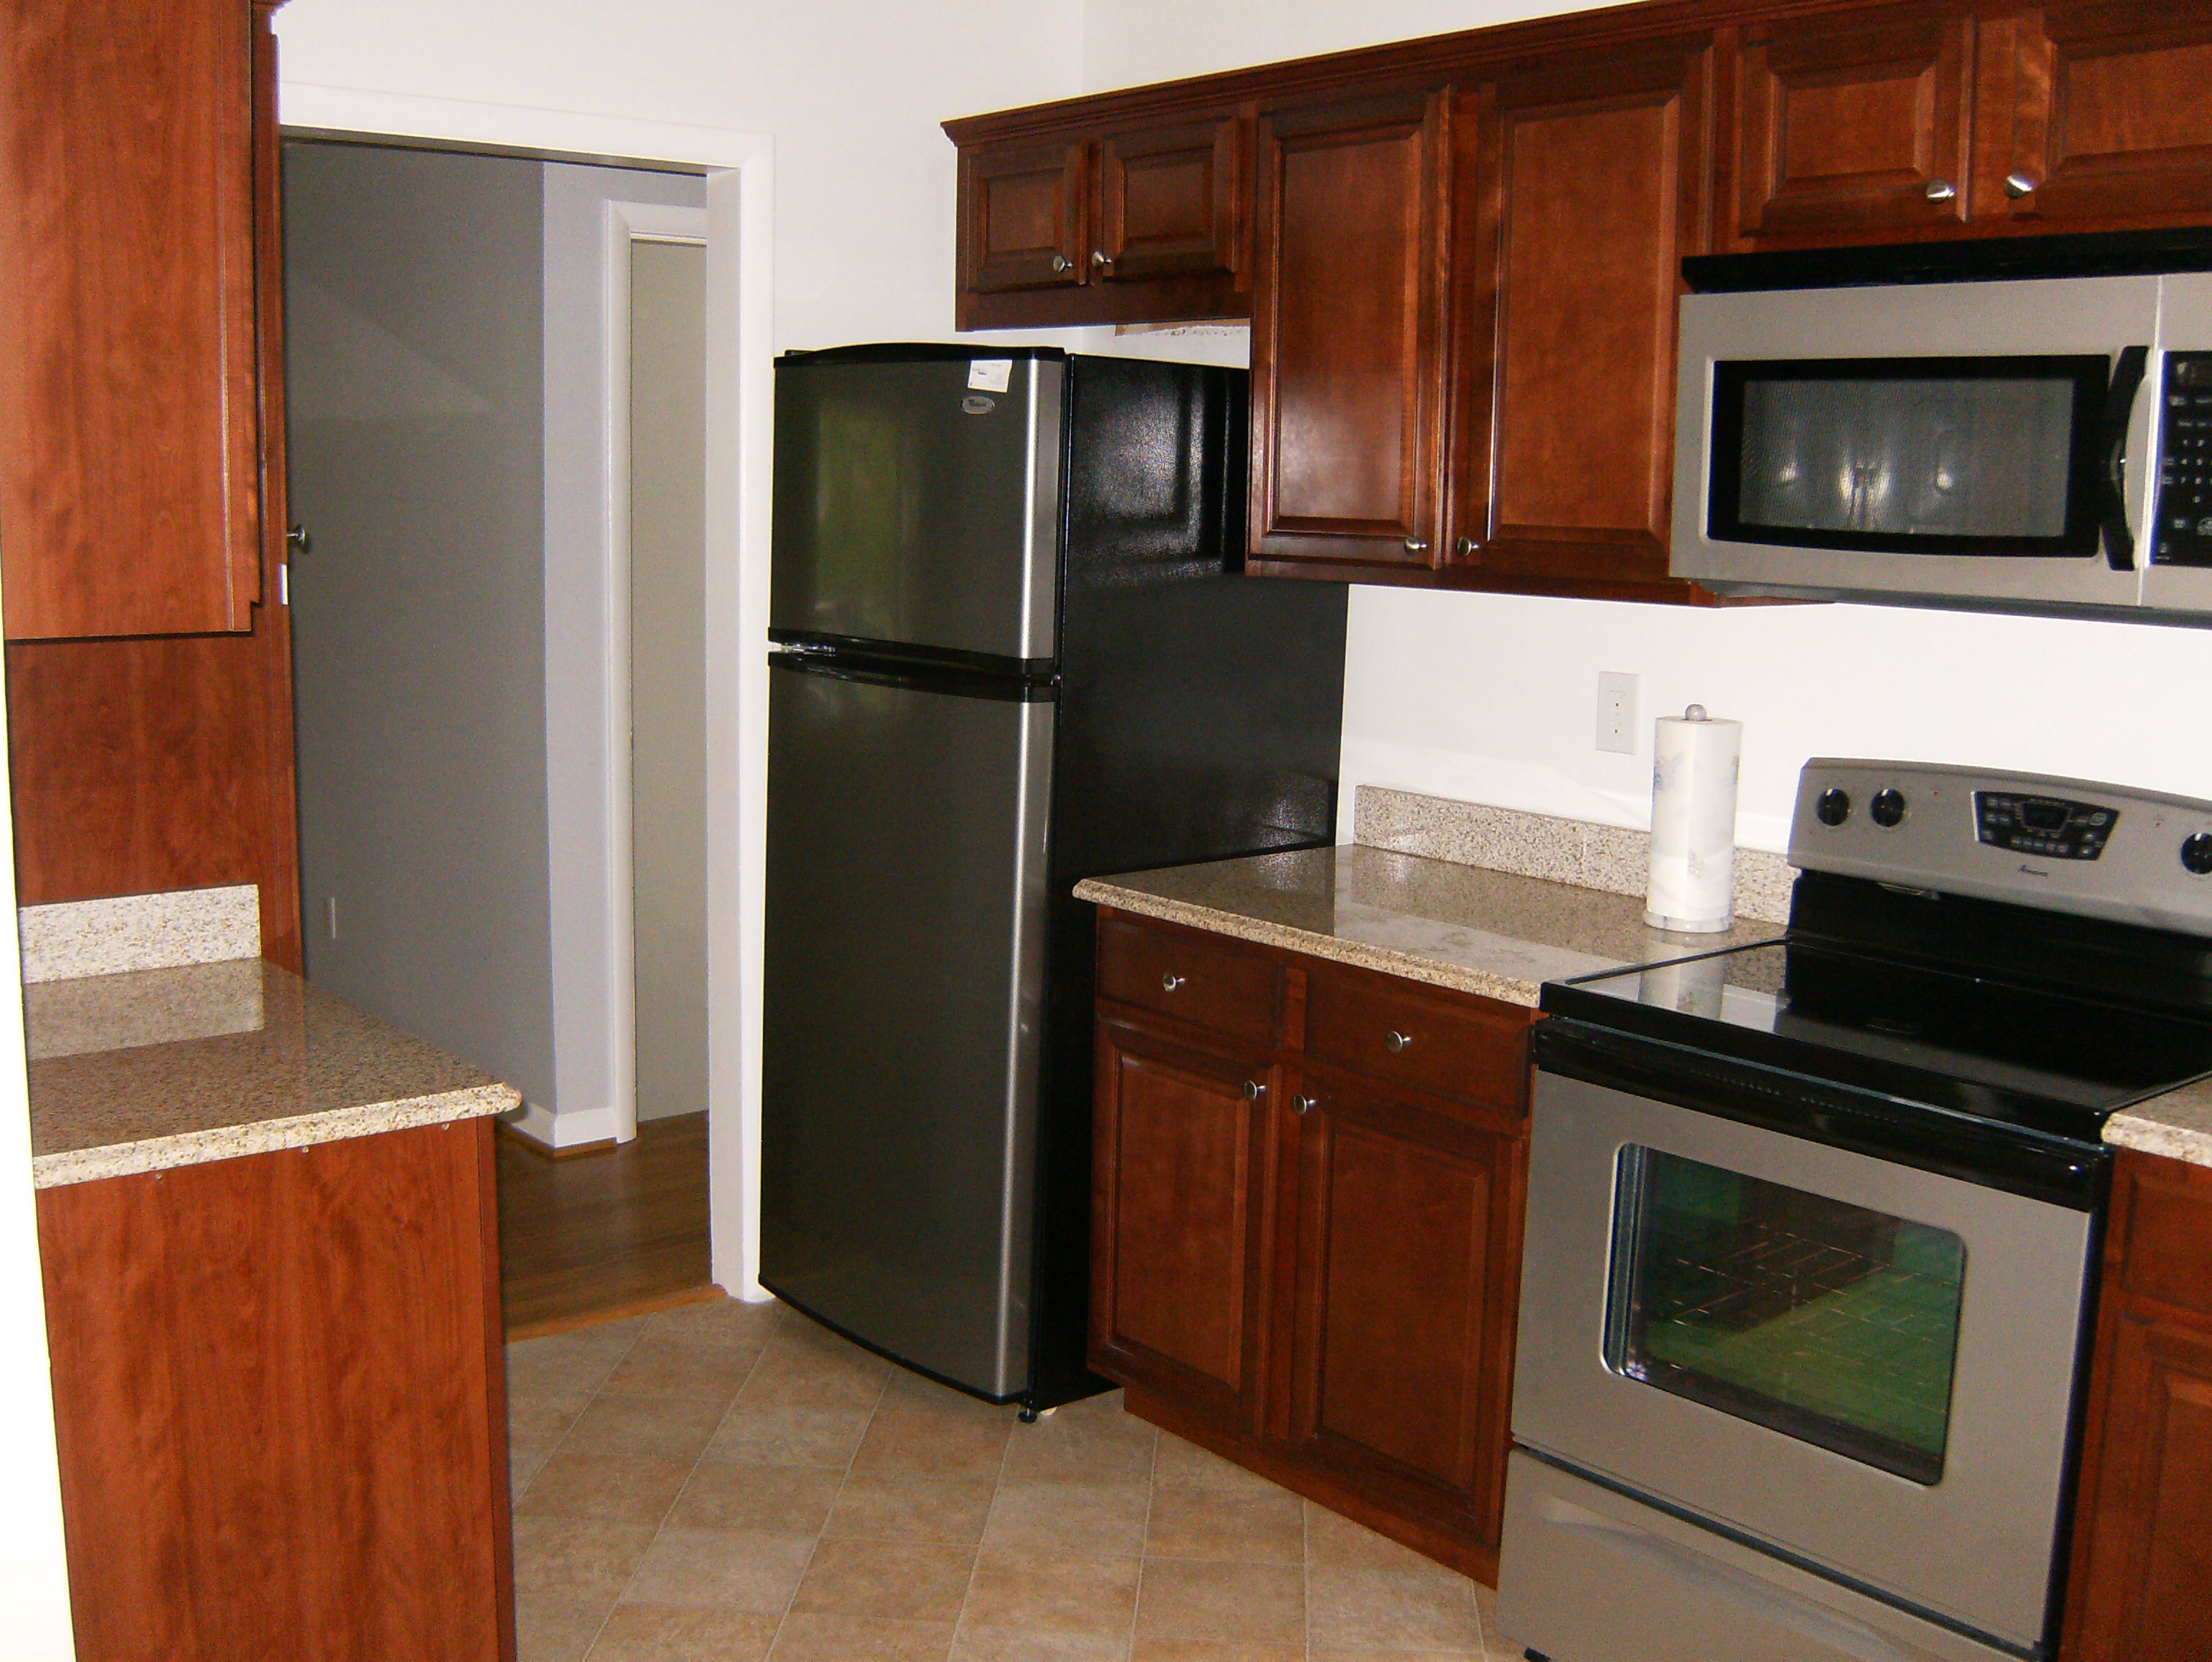 all new cabinets, counters, appliances, floor